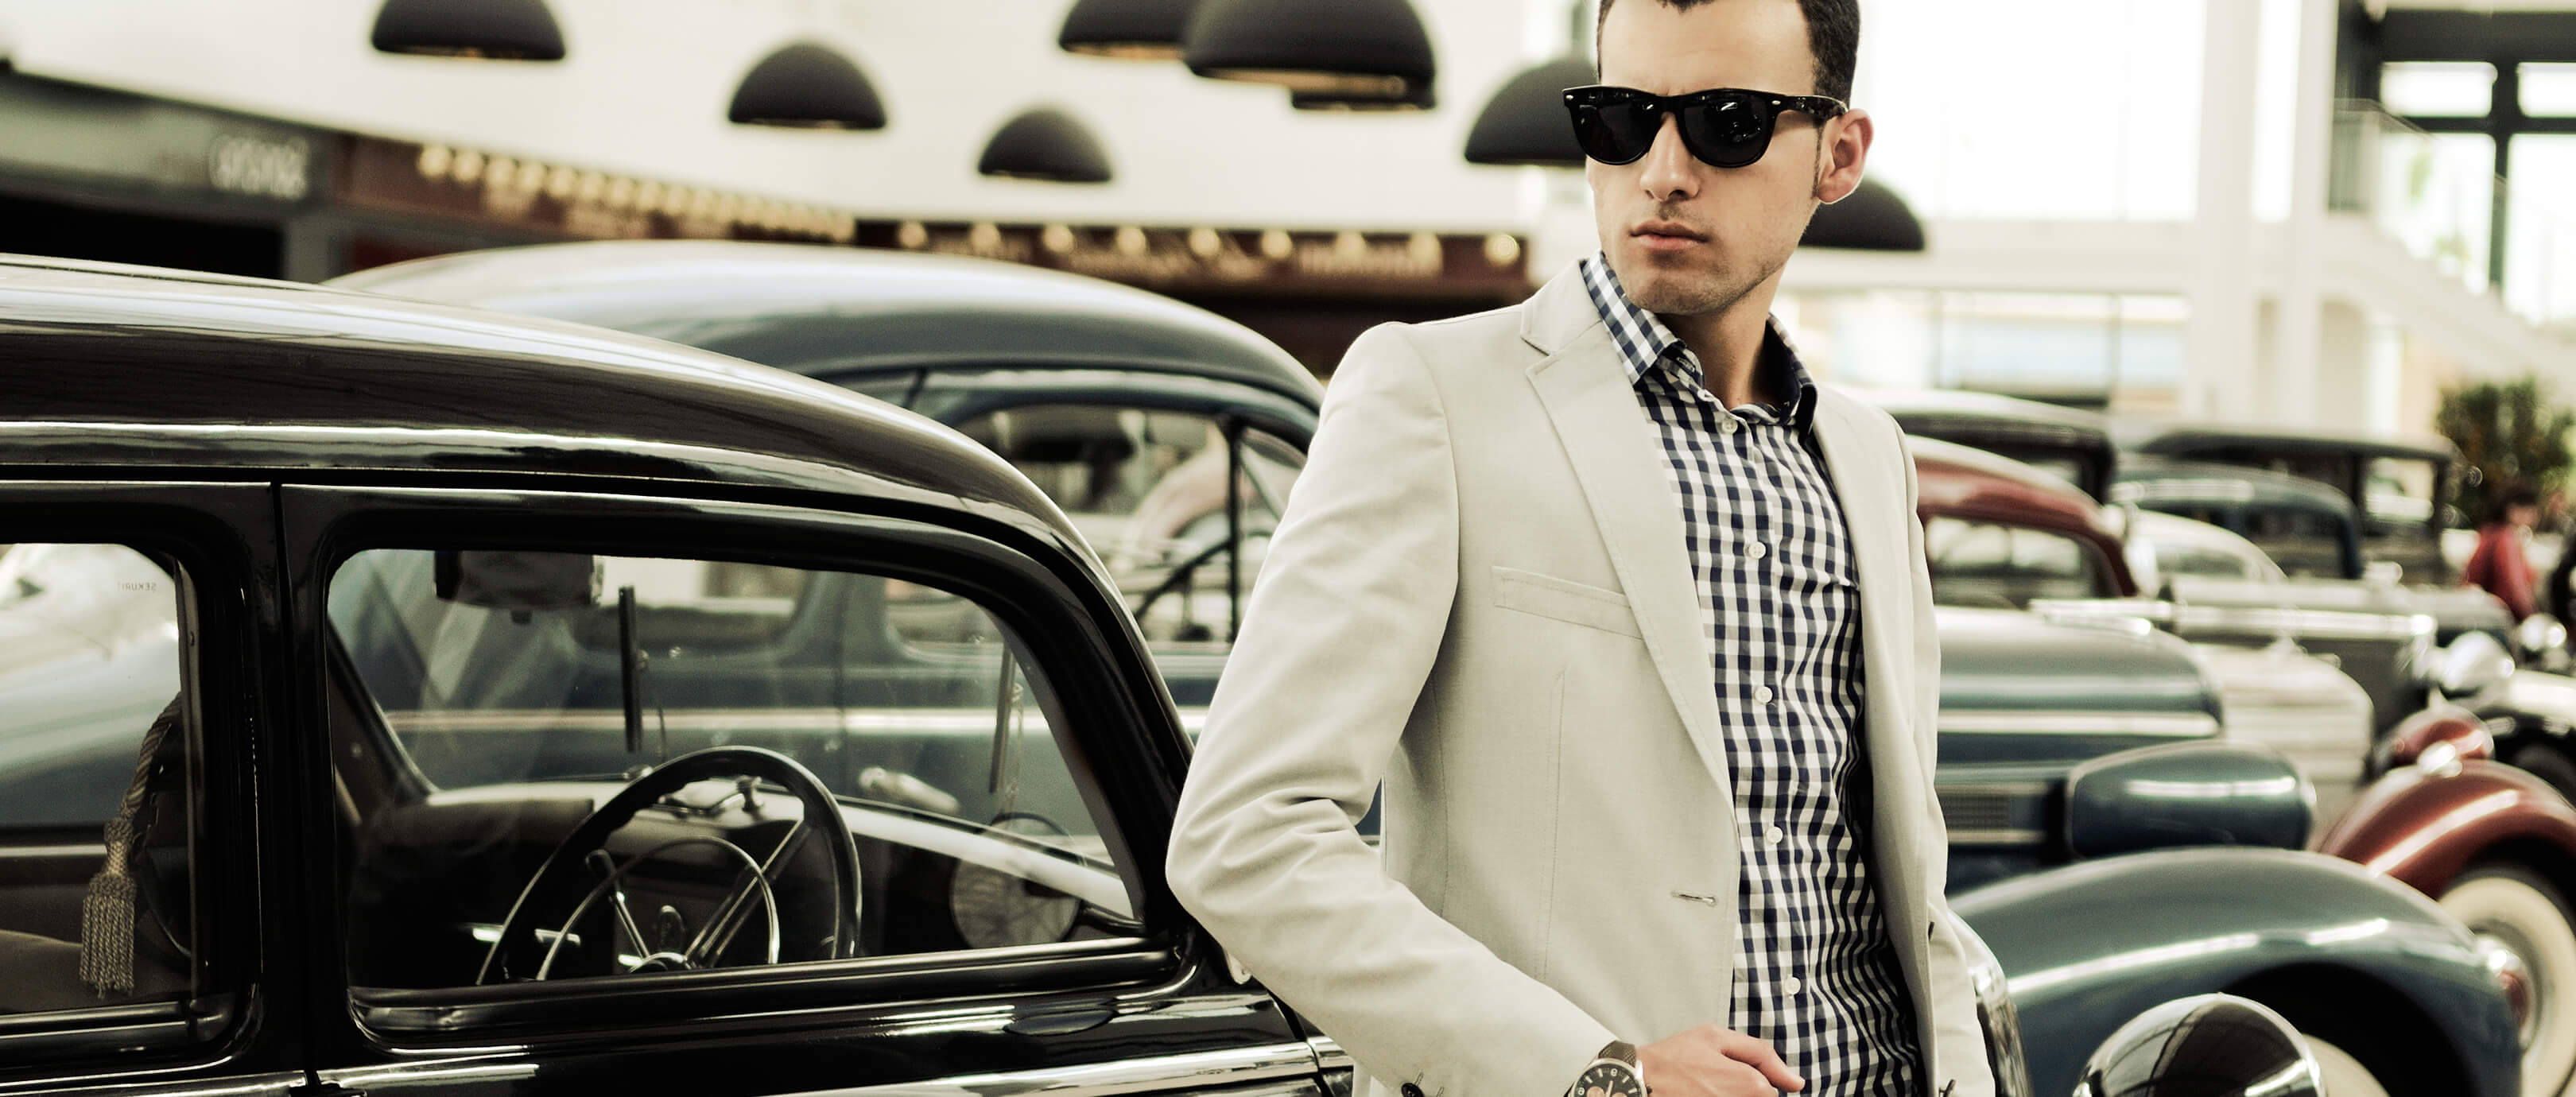 Business Casual: Tips and Tricks To Nail The Look